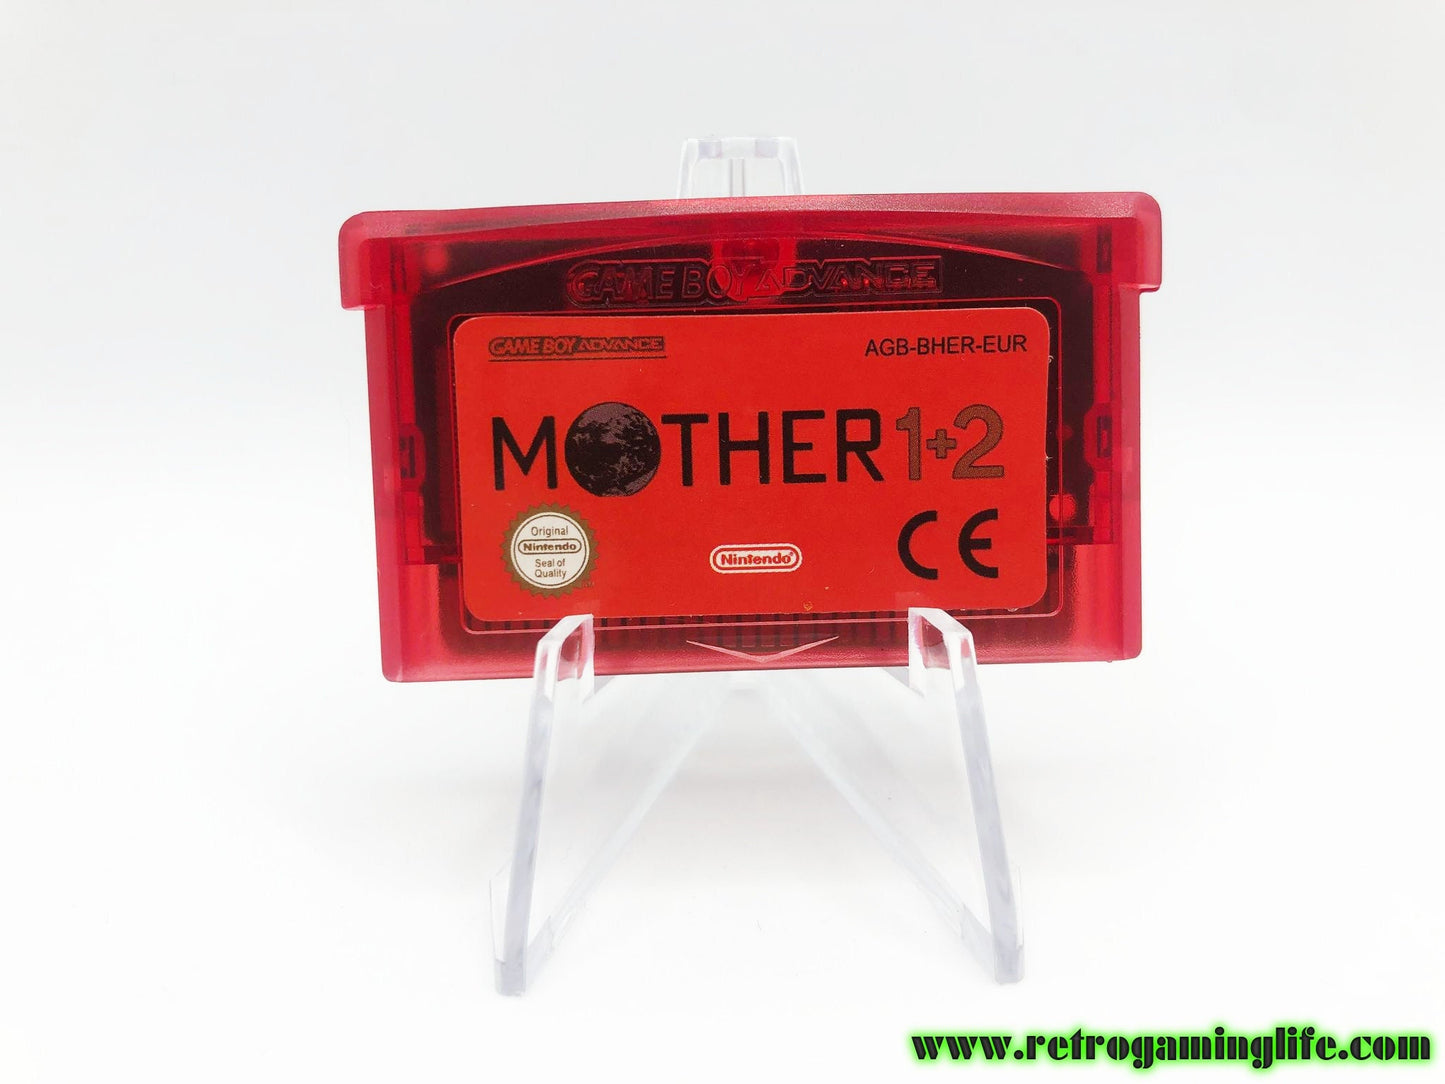 Mother 1 + 2 Gameboy Advance English Game